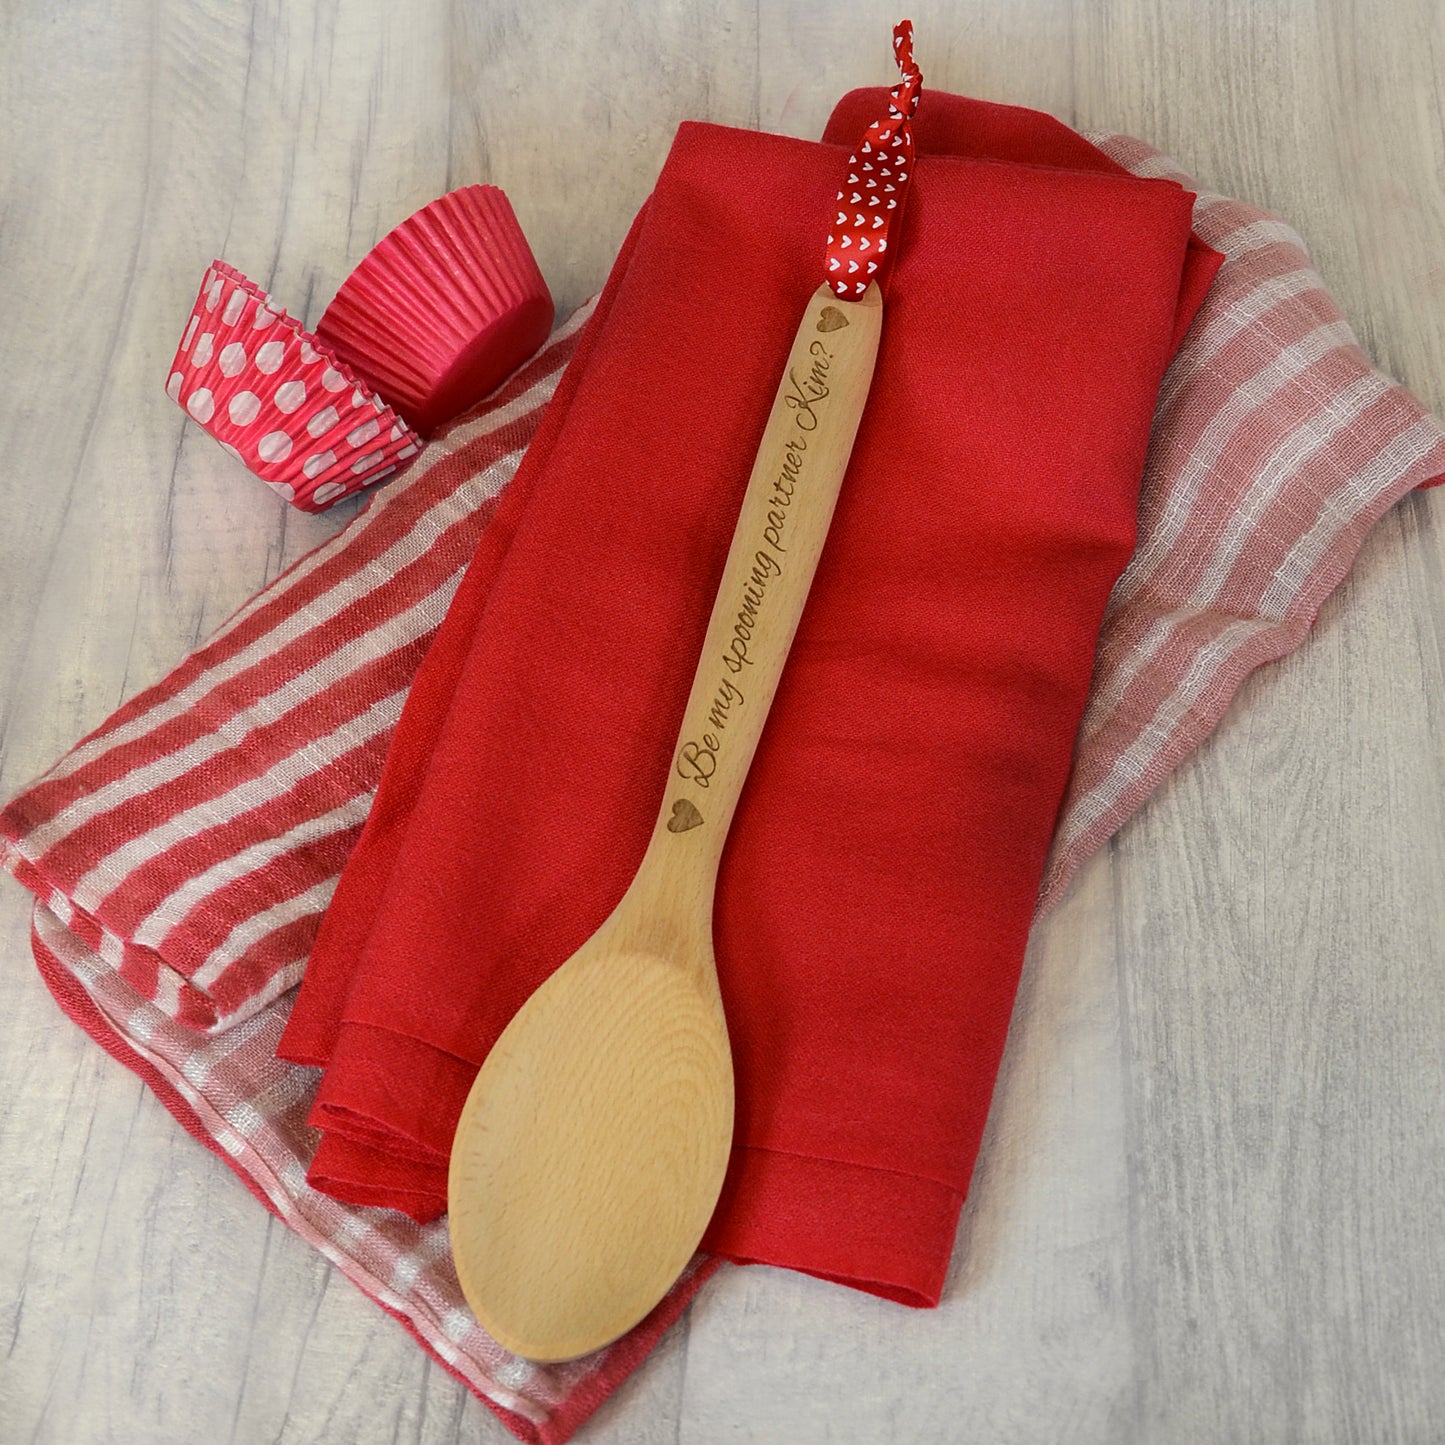 Cheeky personalised wooden spoon for Valentine's Day